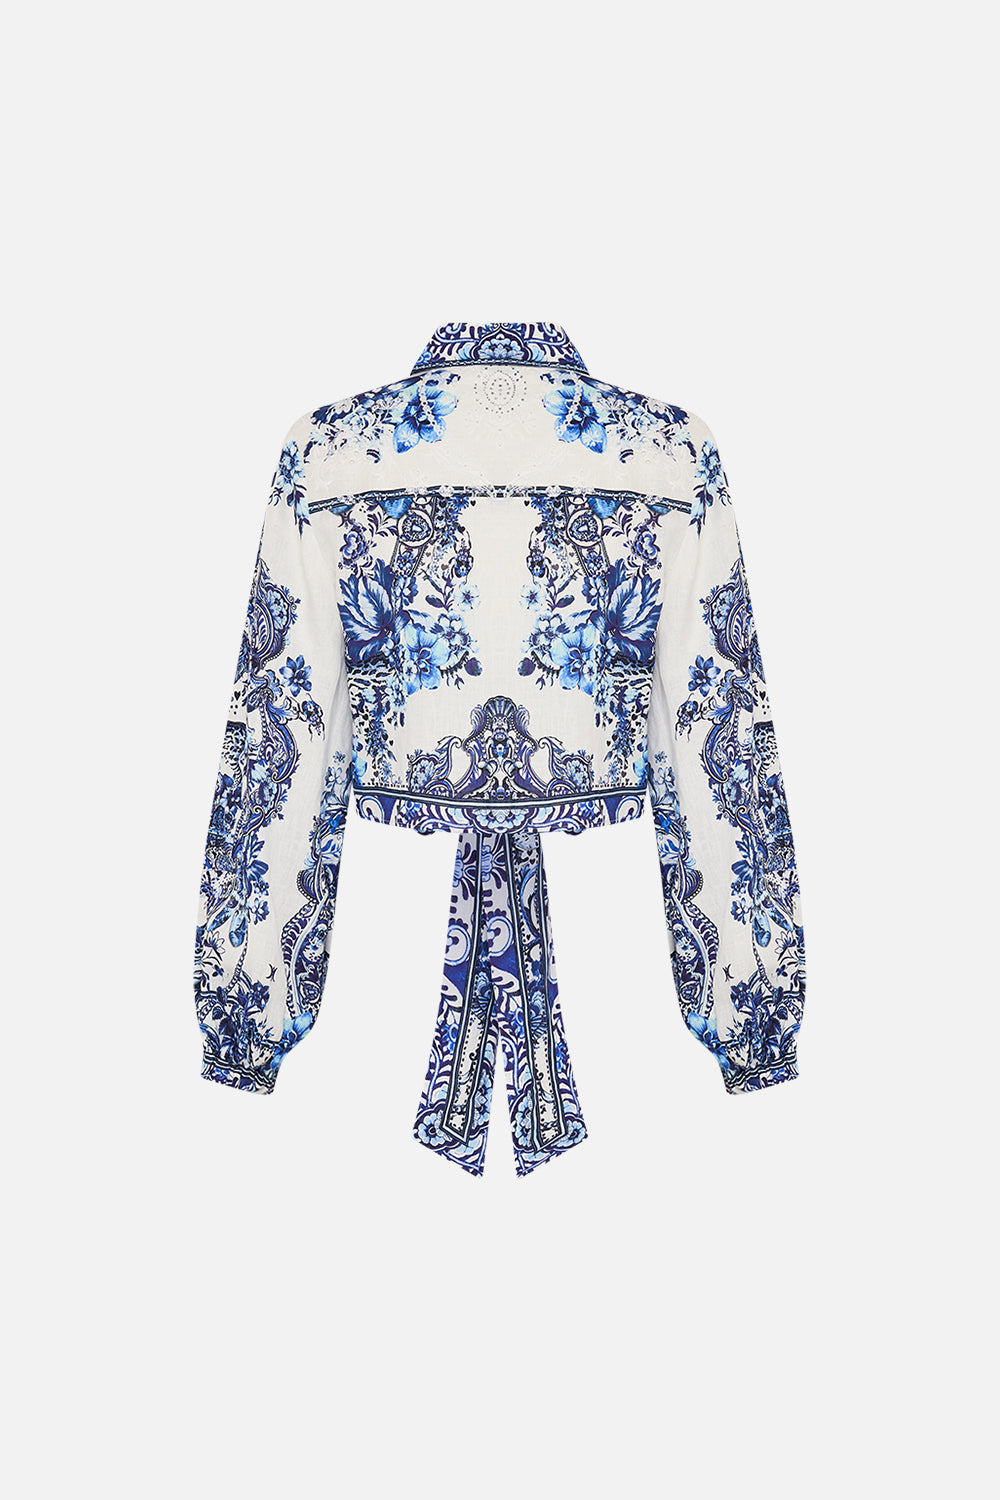 Back view of CAMILLA cropped wrap shirt in Glaze and Graze print